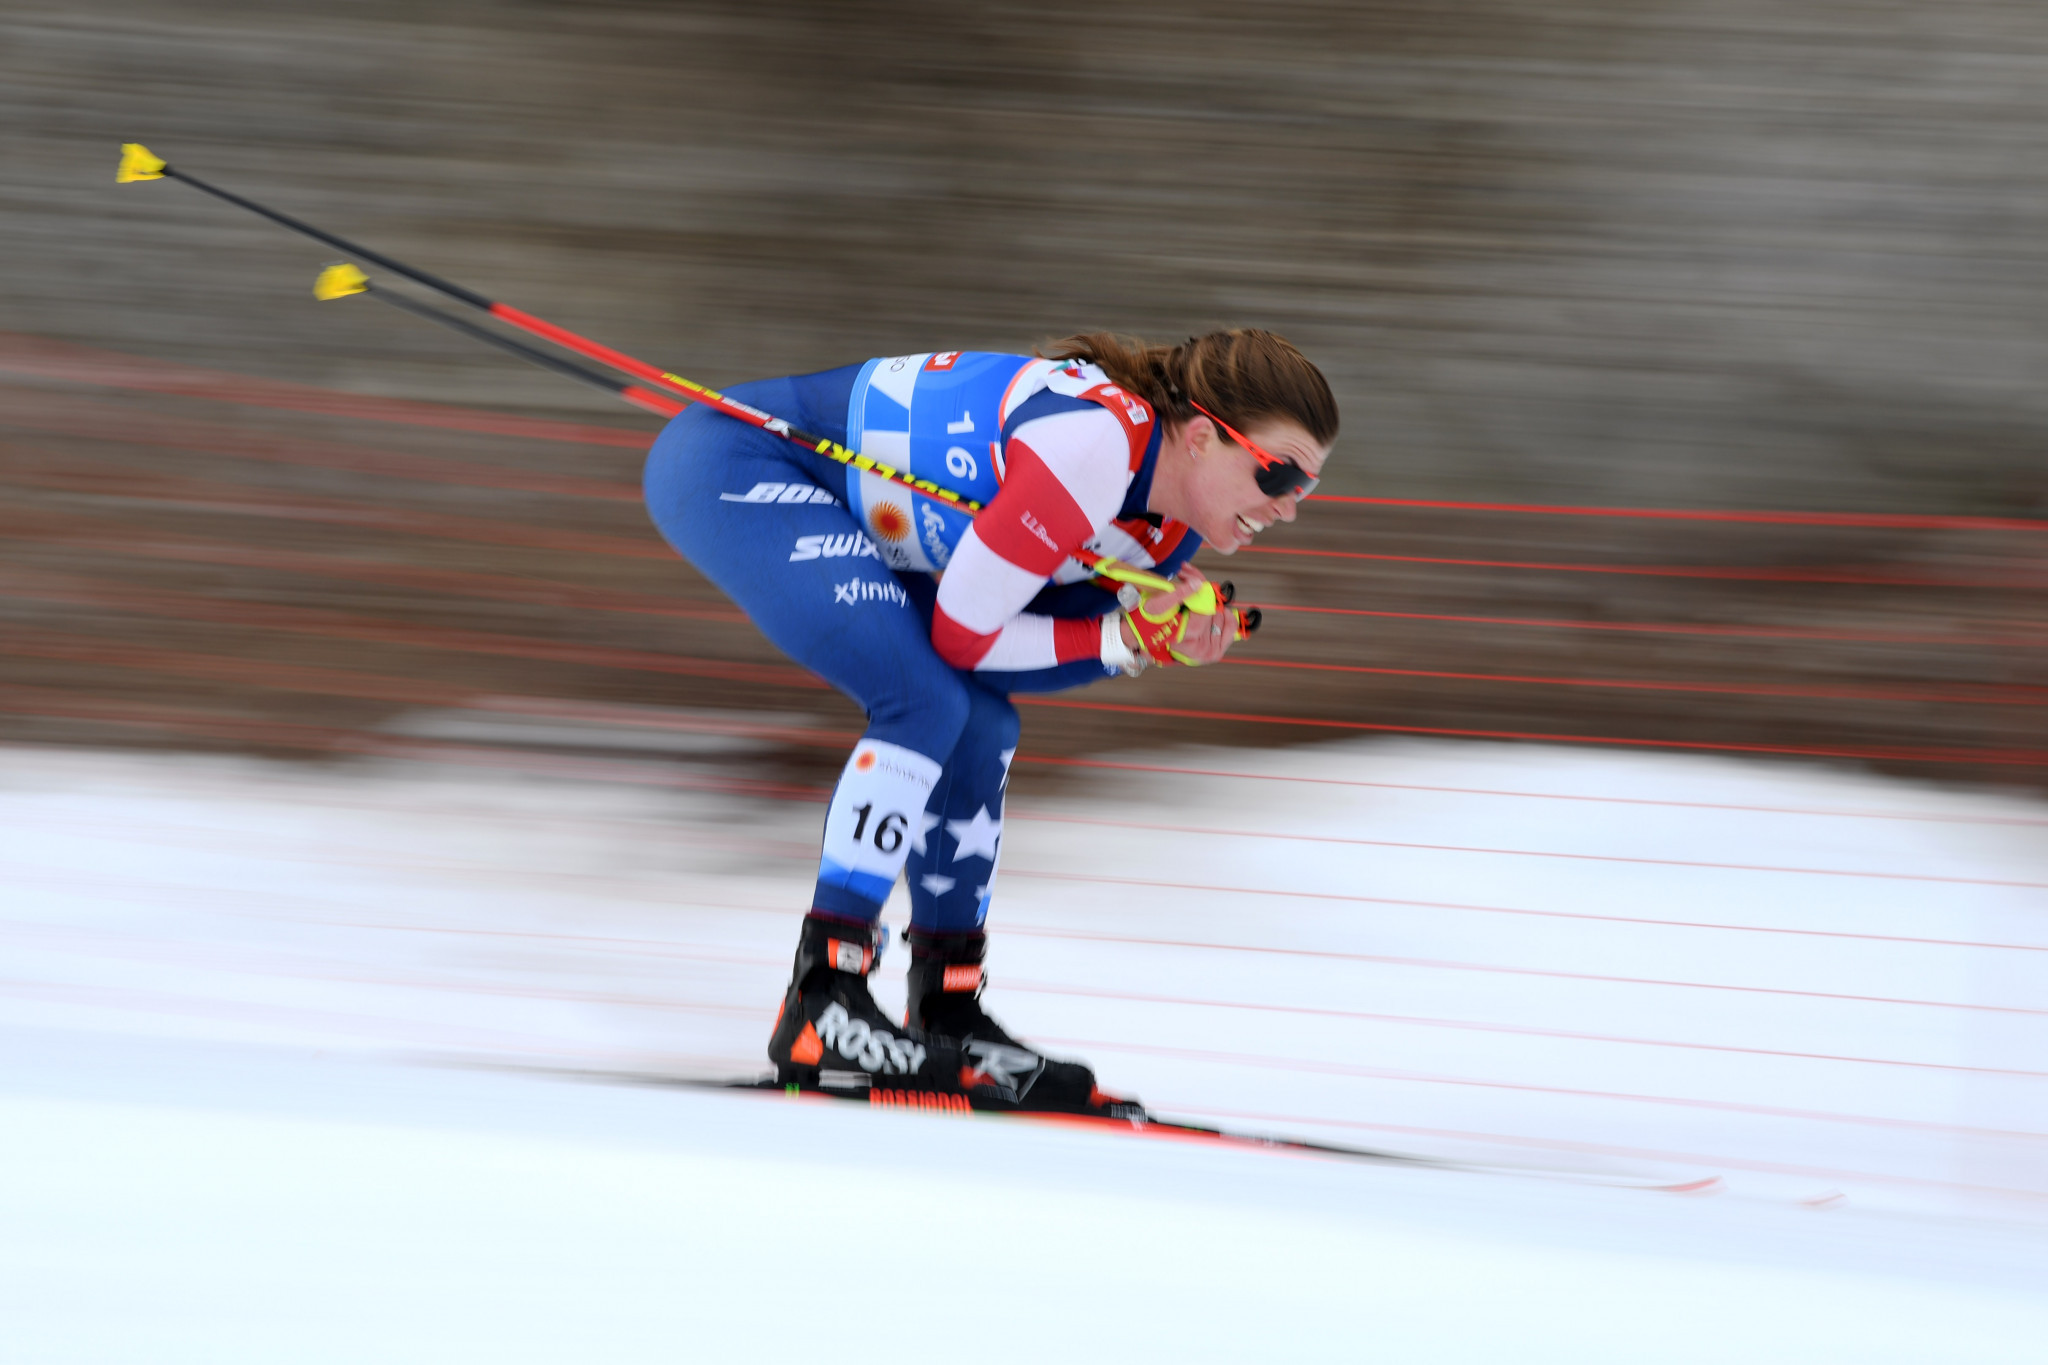 Rosie Brennan won the sprint and 10km races in Davos to take the overall World Cup lead ©Getty Images